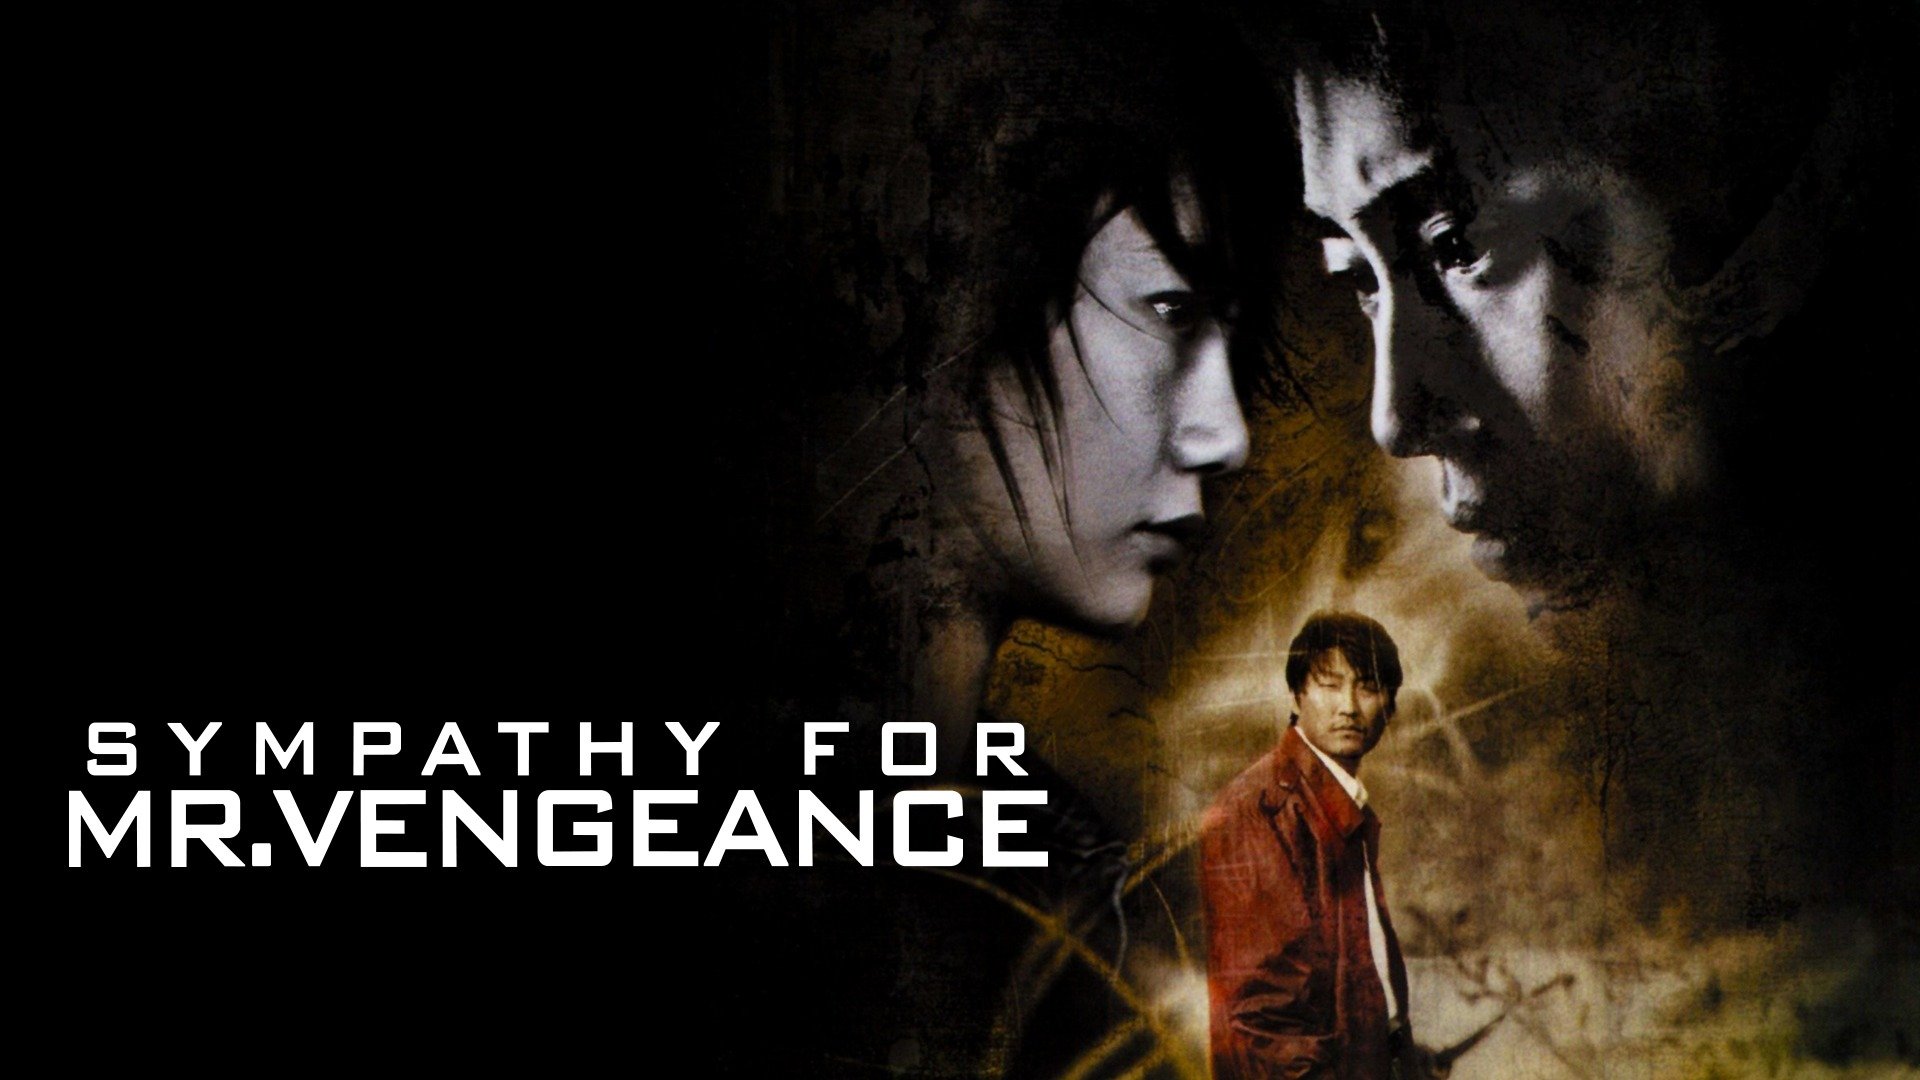 34-facts-about-the-movie-sympathy-for-mr-vengeance